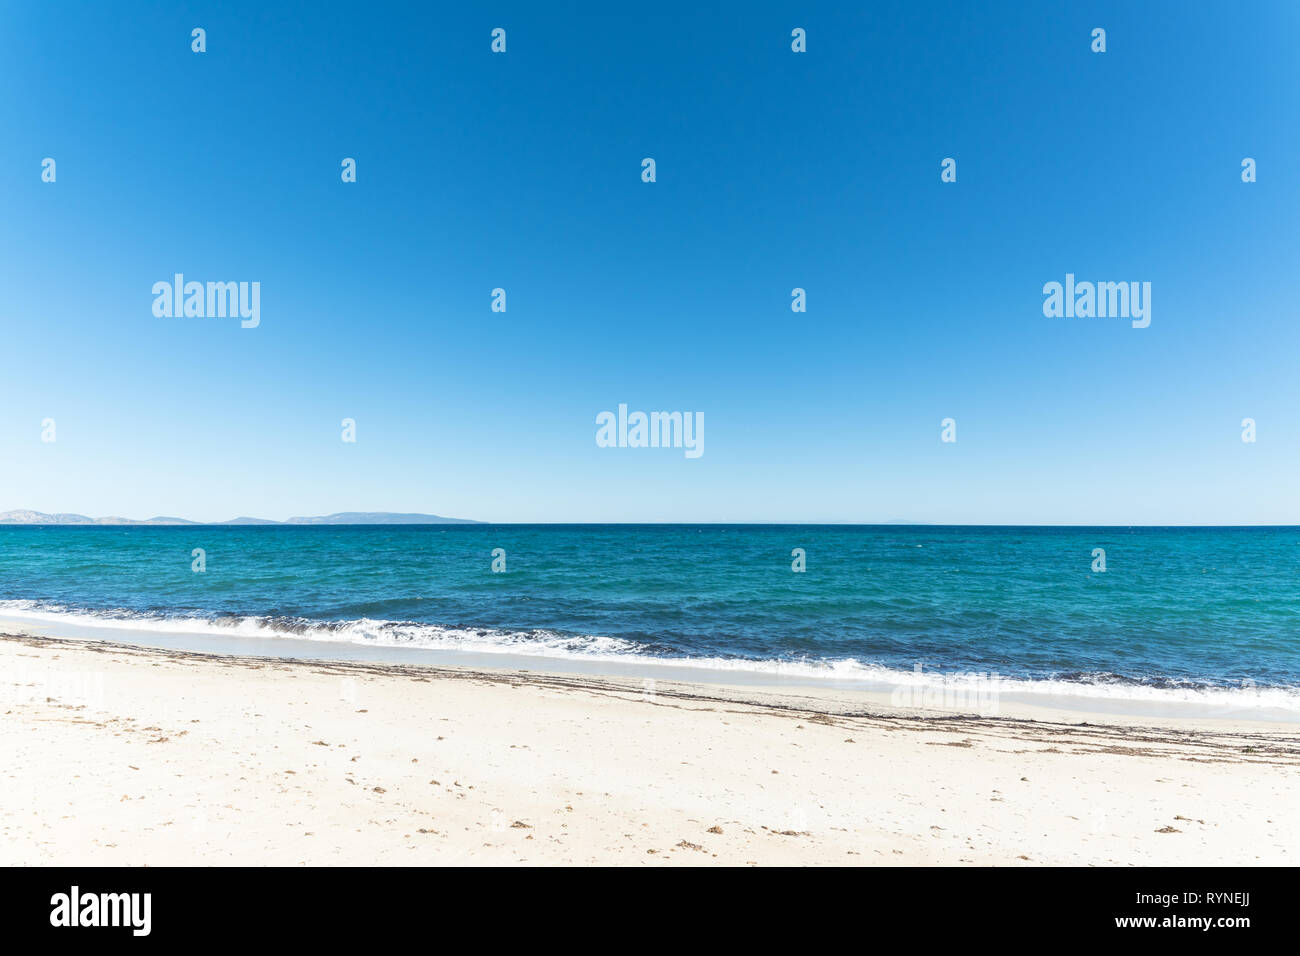 landscape of empty tropical beach with white sand and turquoise water Stock Photo